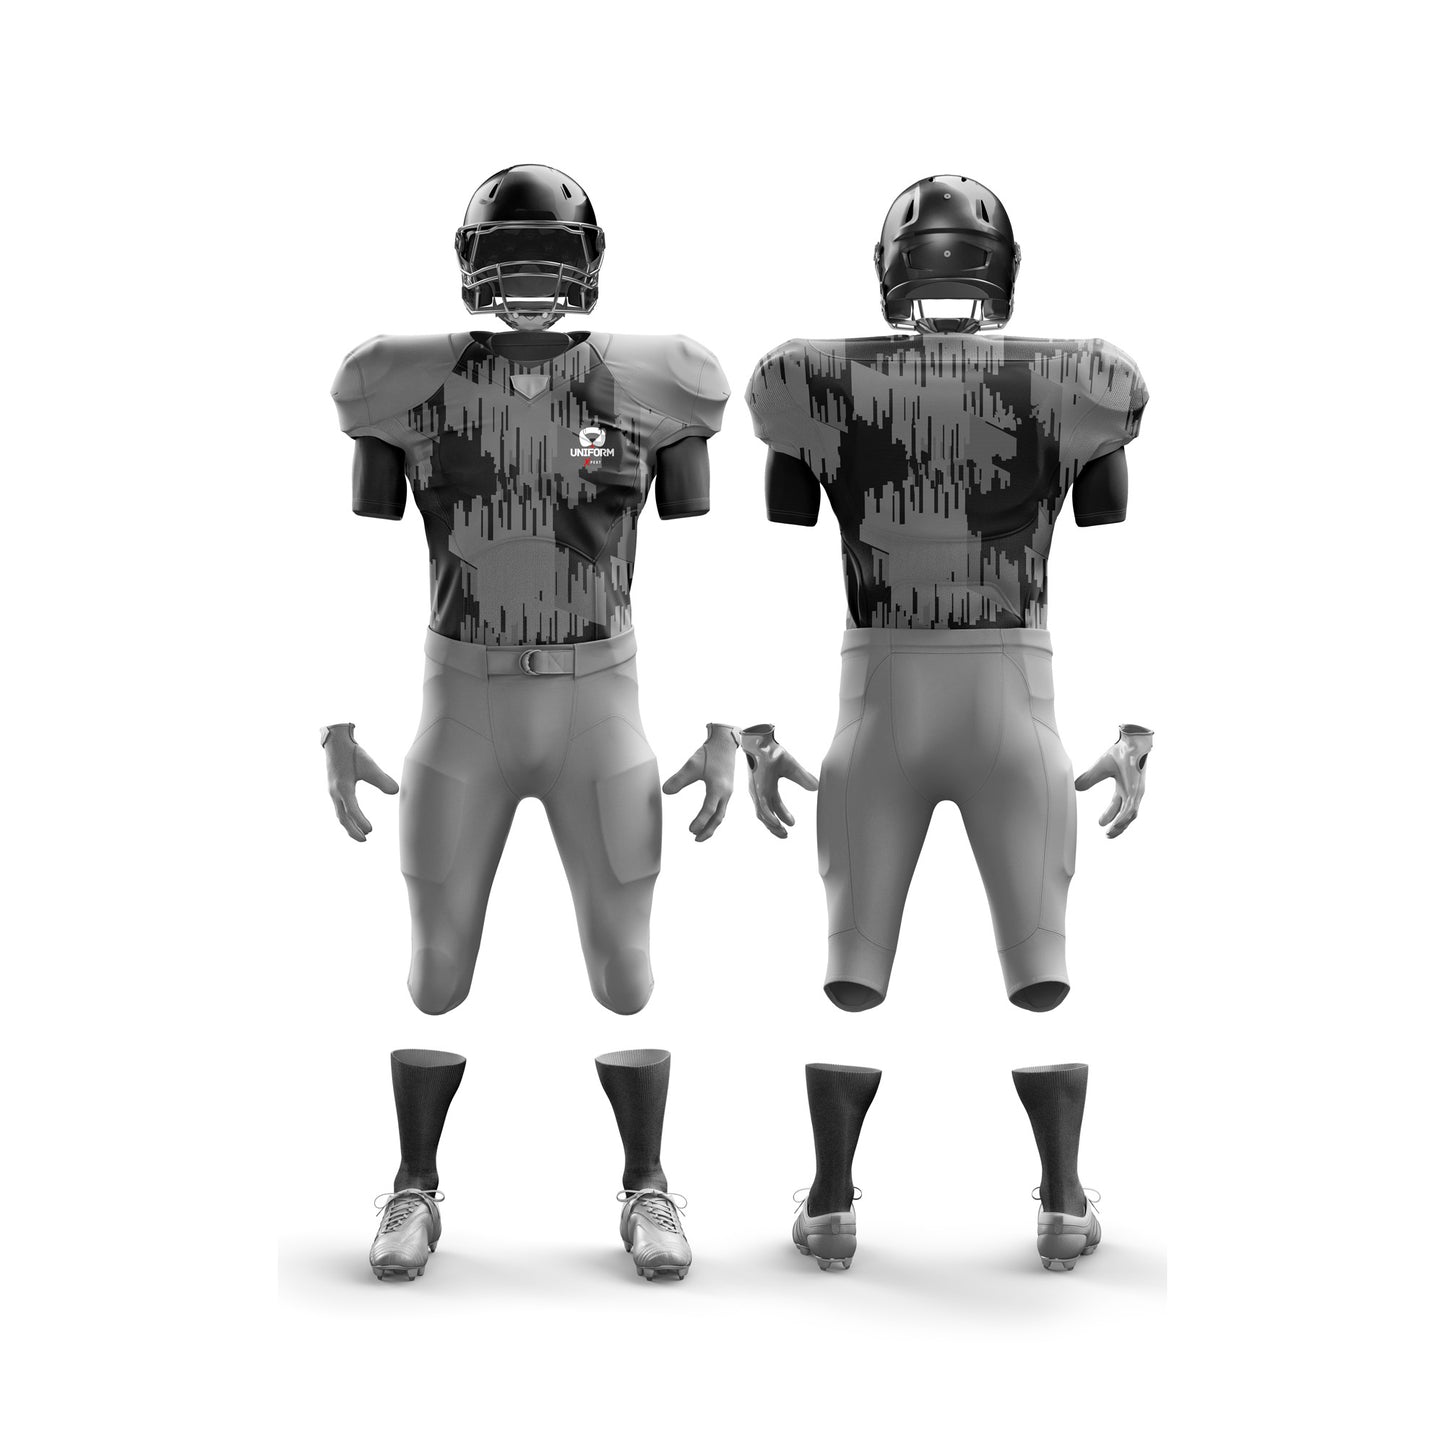 Uniform Xpert American Football Uniform: Designed for elite athletes with the durability and comfort needed to excel in intense games and practices. Ideal for football players in the USA, UK, Canada, featuring advanced moisture-wicking technology, reinforced seams, and a sleek, professional design. Perfect for achieving peak performance during competitive seasons, comparable to the intensity of the cricket world cup.